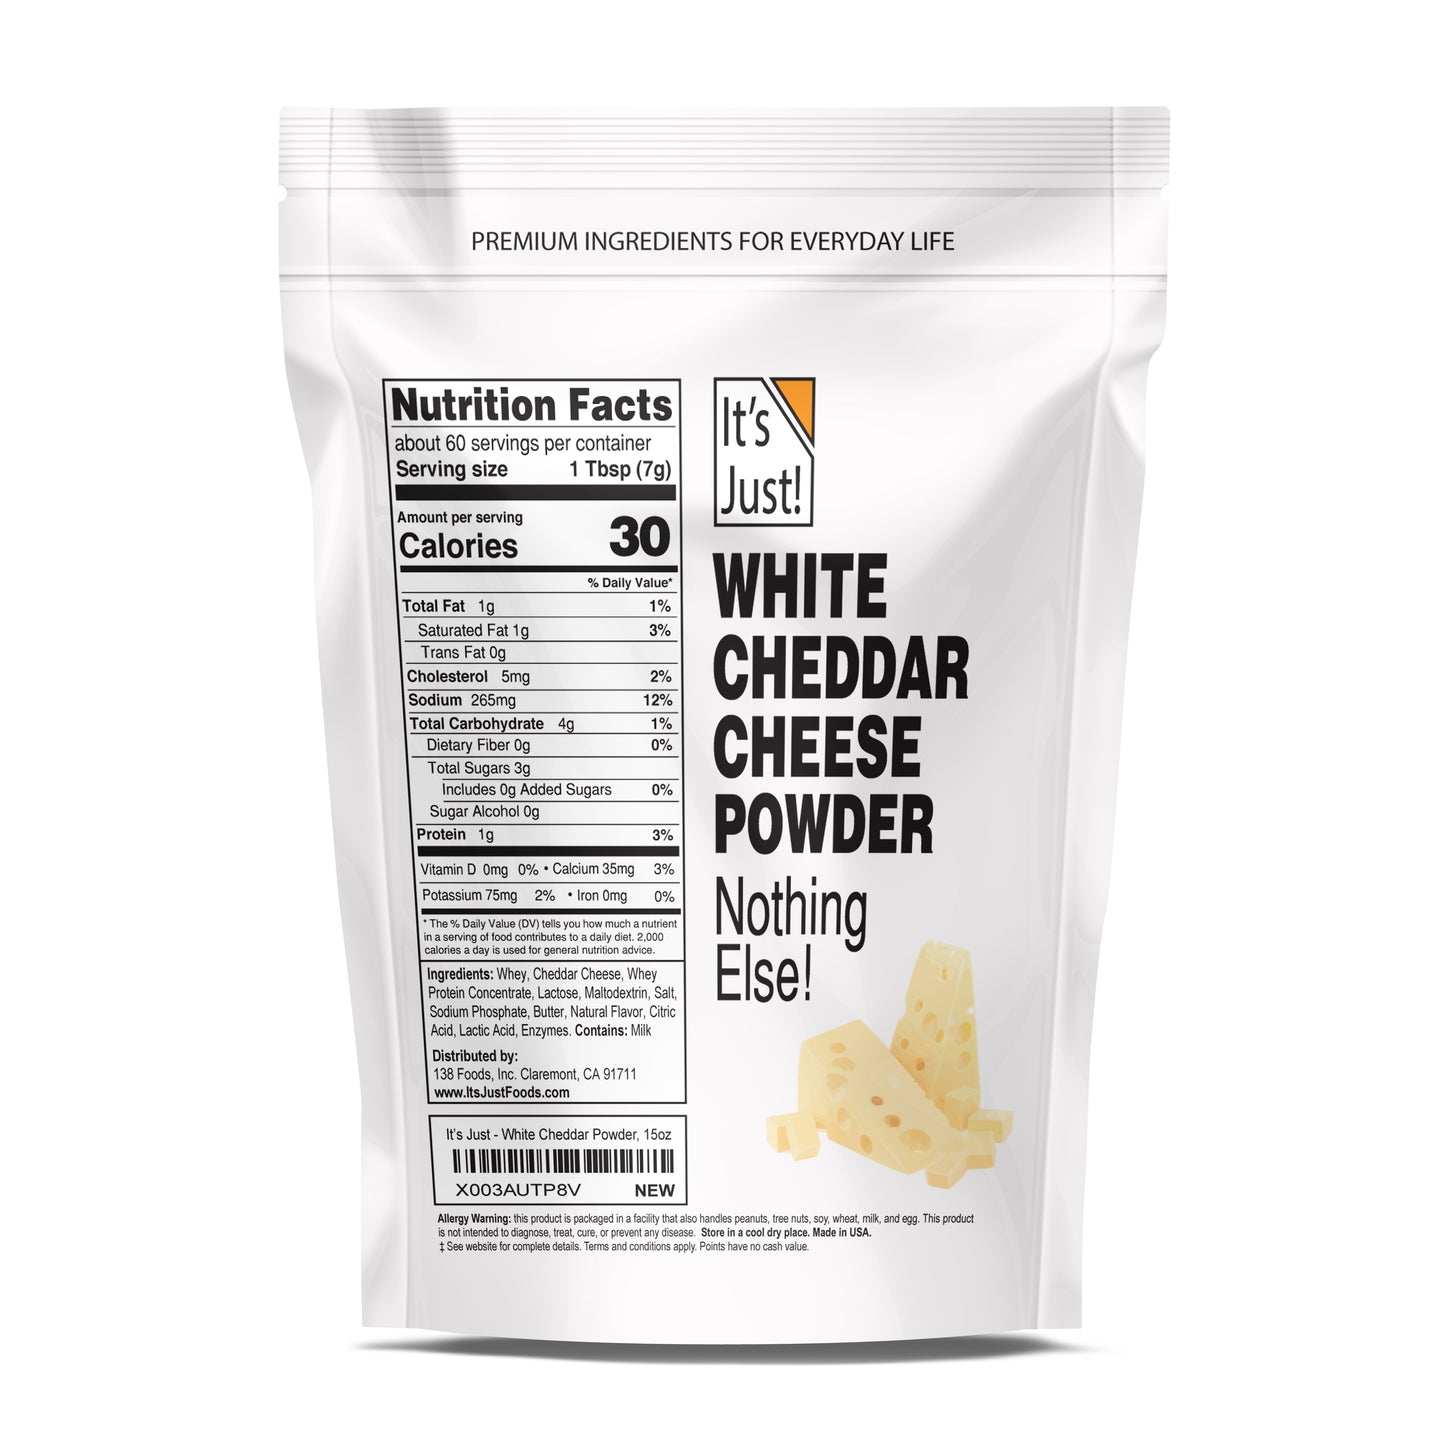 It's Just! - White Cheddar Cheese Powder